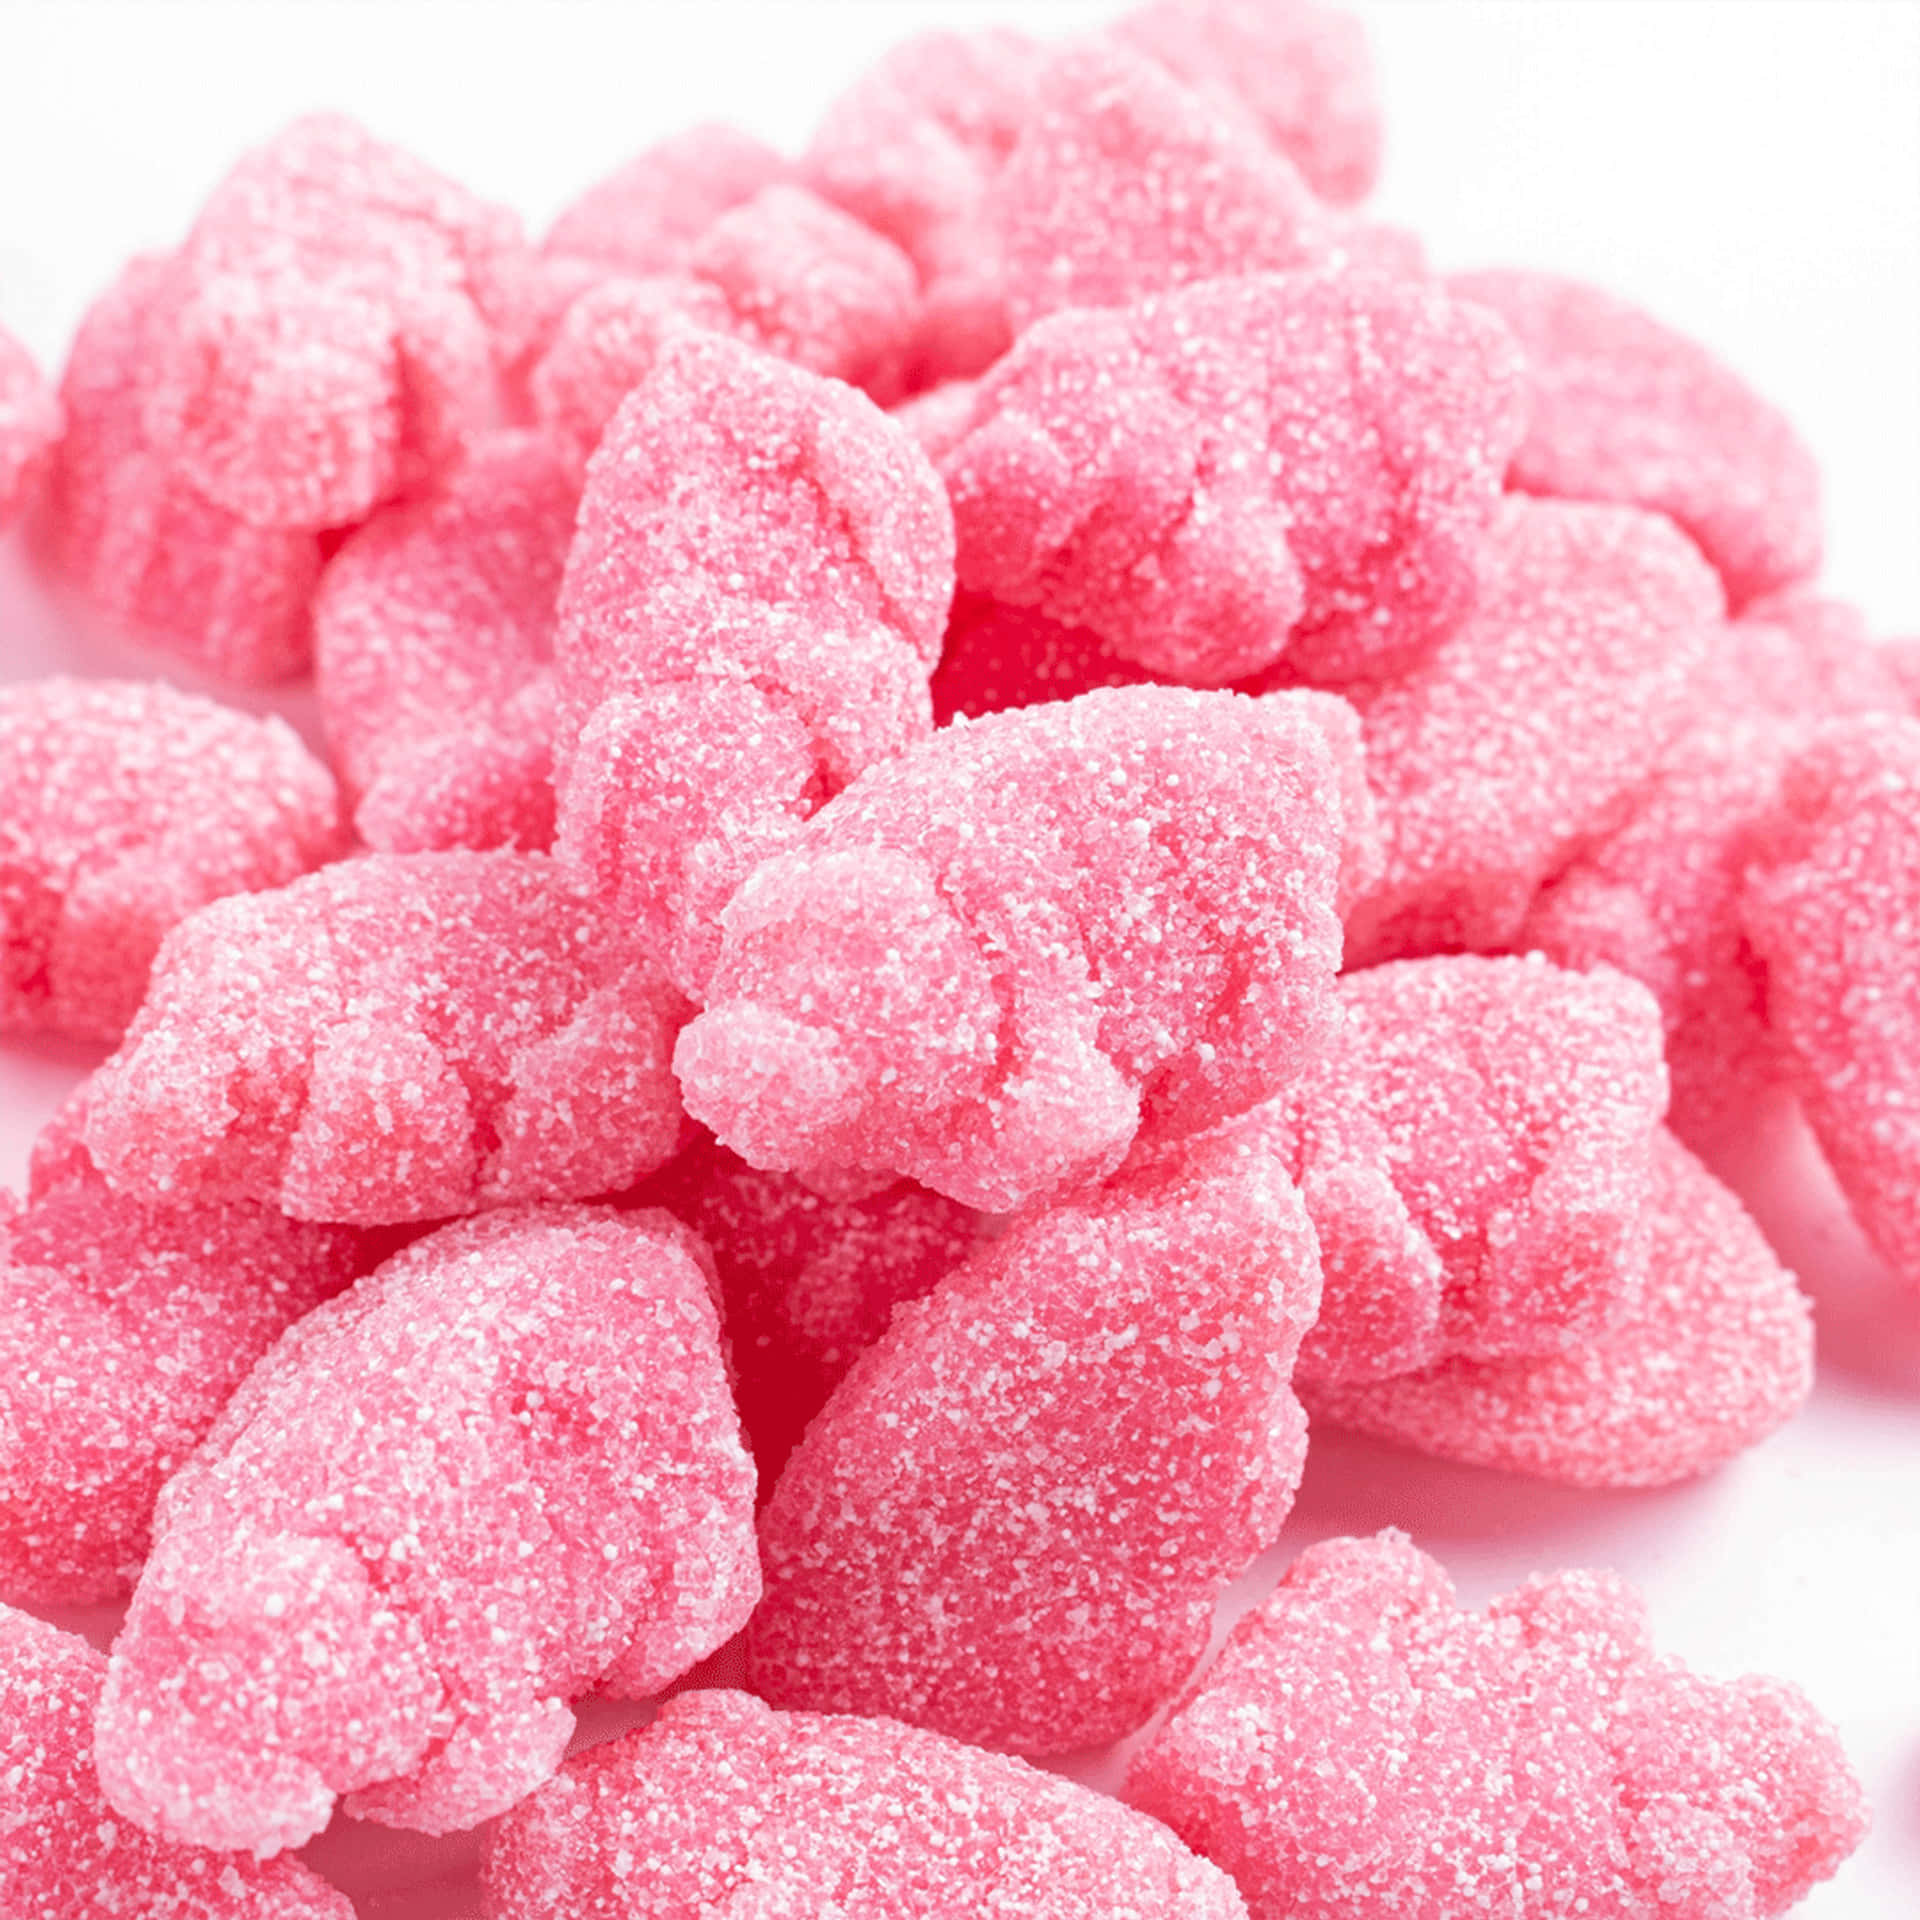 Delightful Pink Candy Explosion Wallpaper